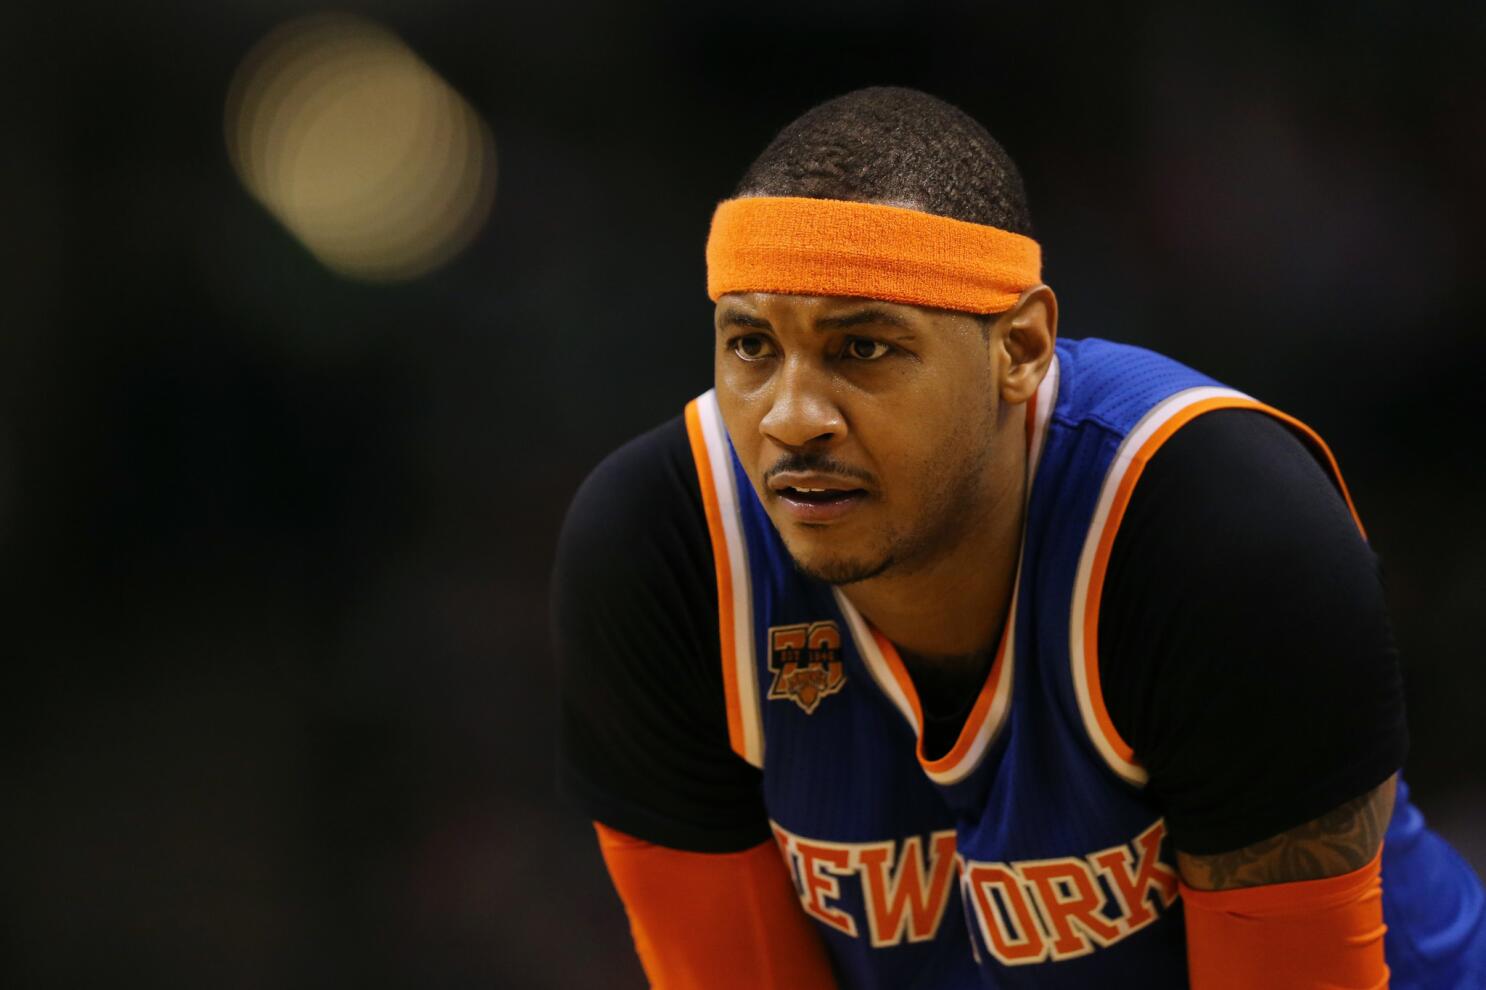 Report: Knicks have reached out to Boston on Carmelo Anthony trade